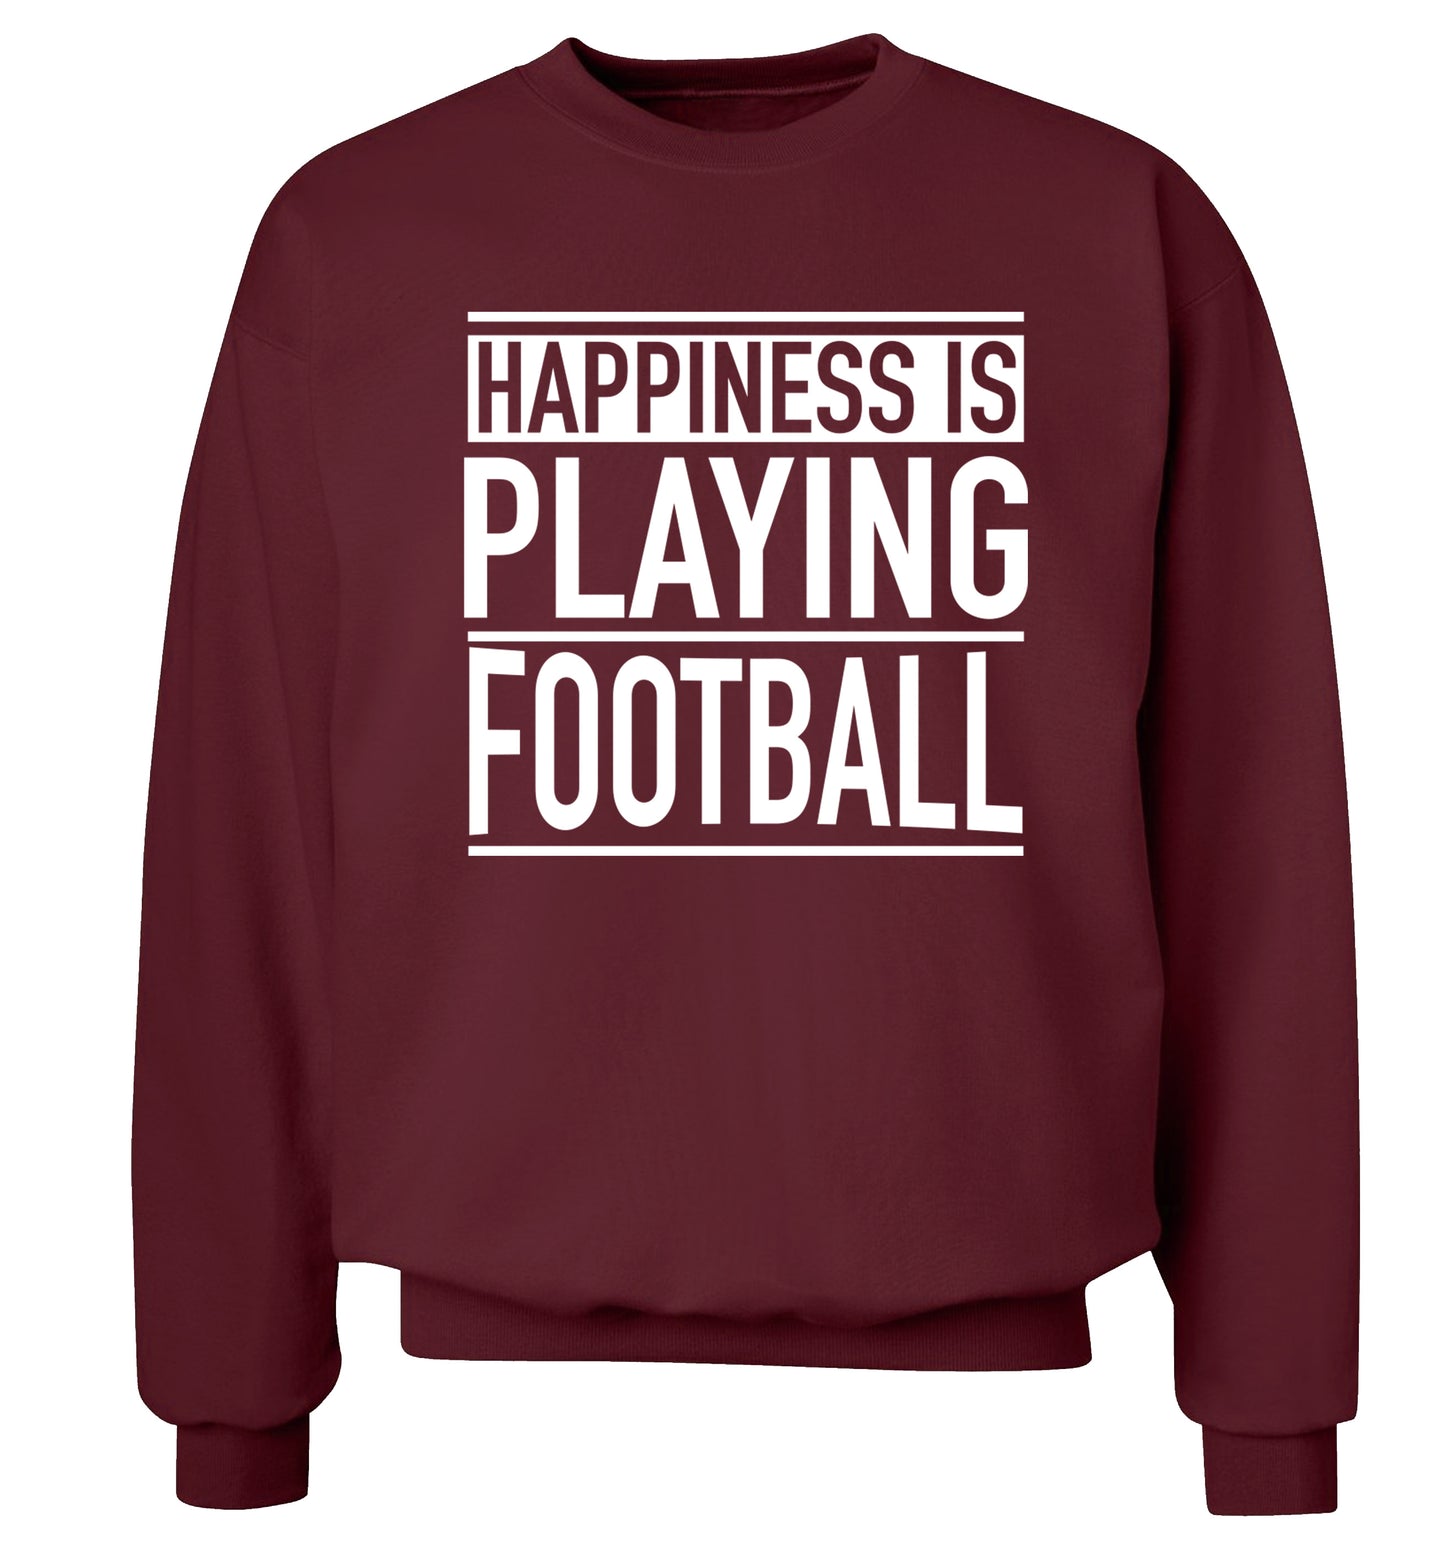 Happiness is playing football Adult's unisexmaroon Sweater 2XL